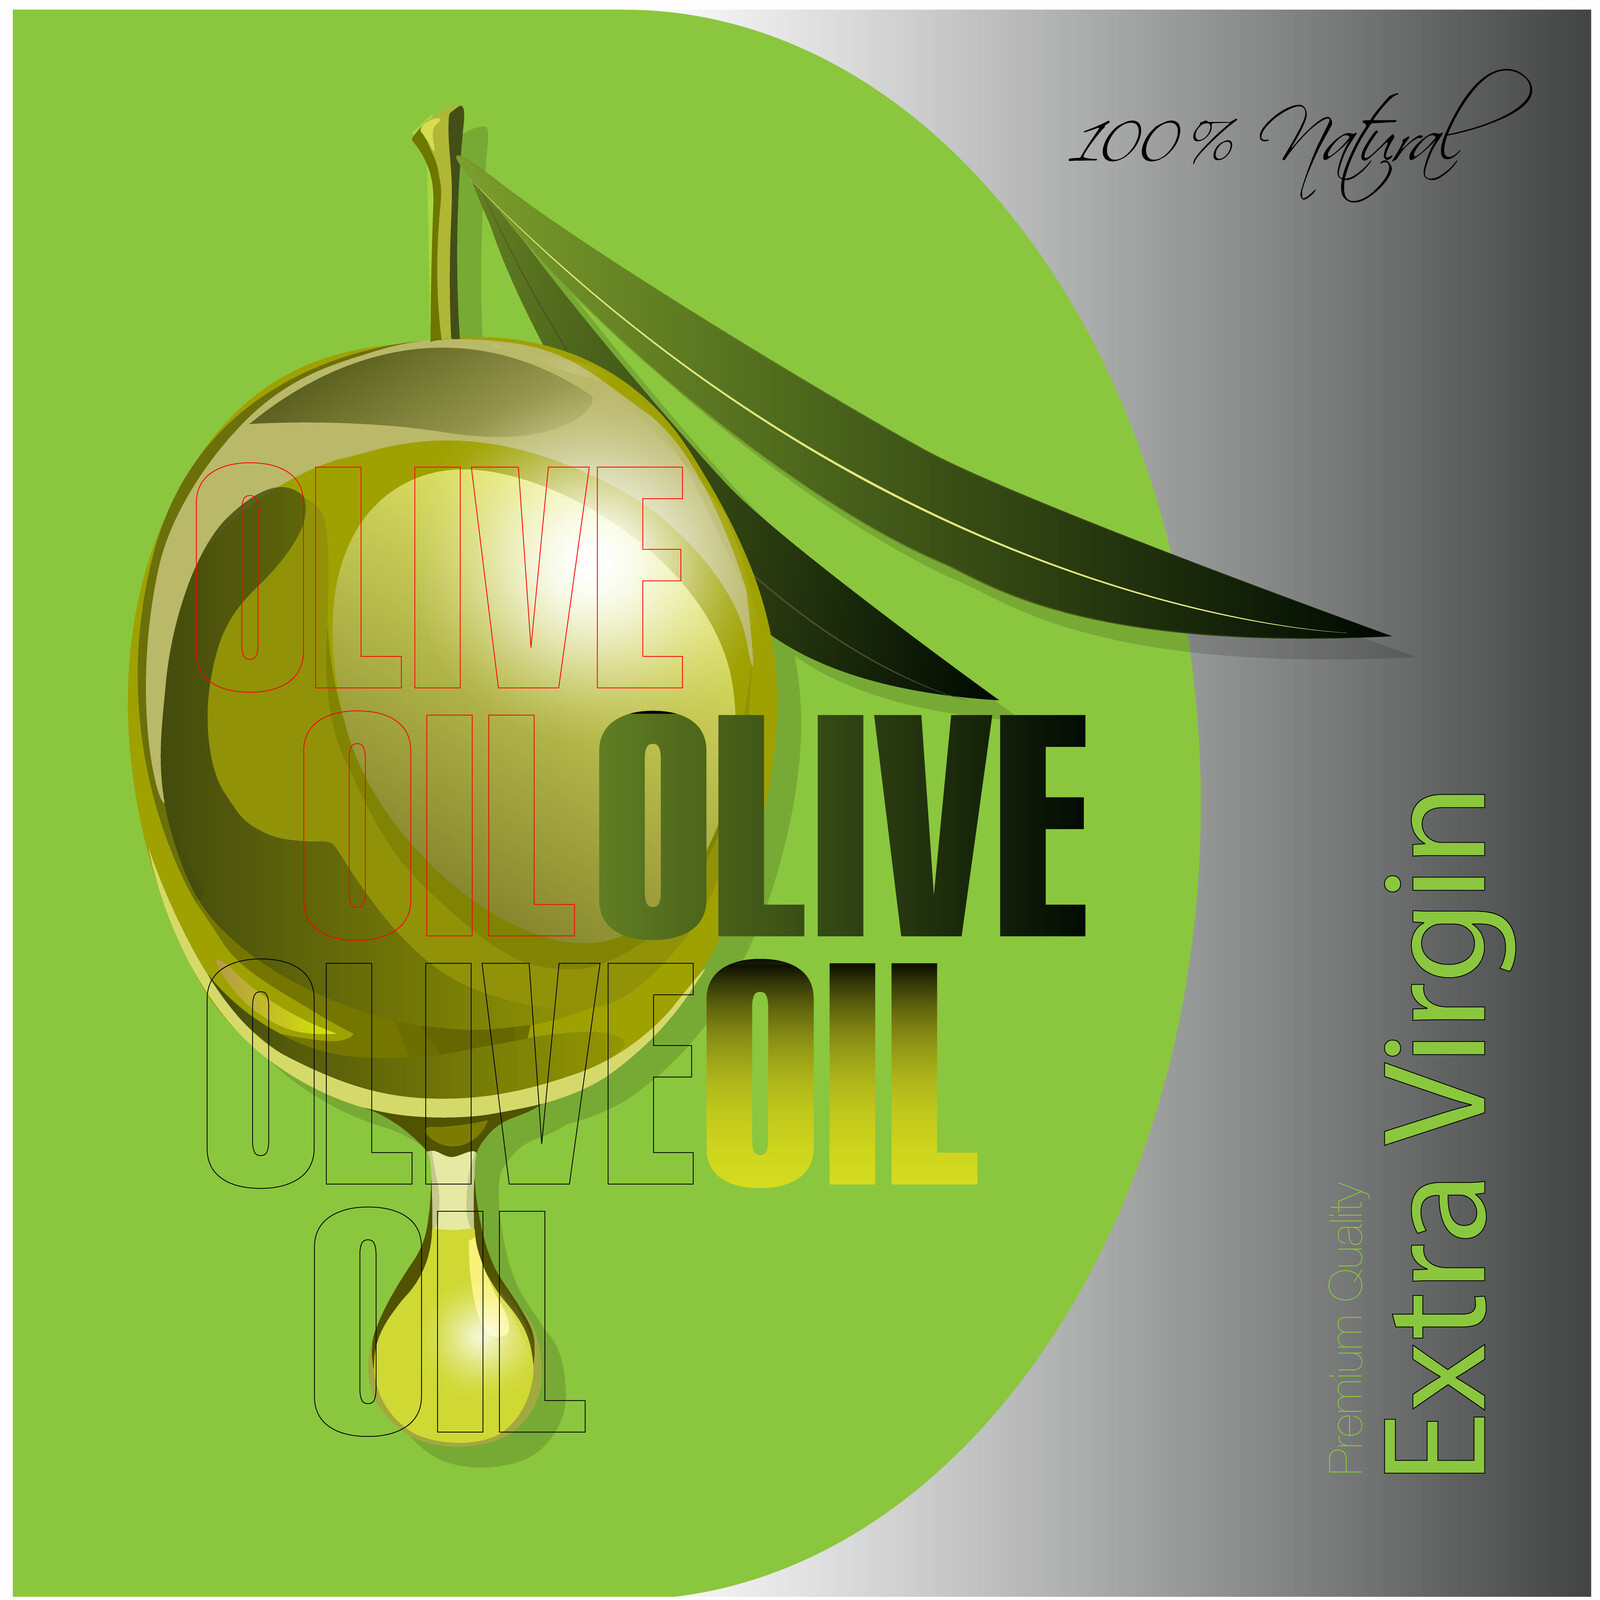 OLIVE LABEL VECTOR1